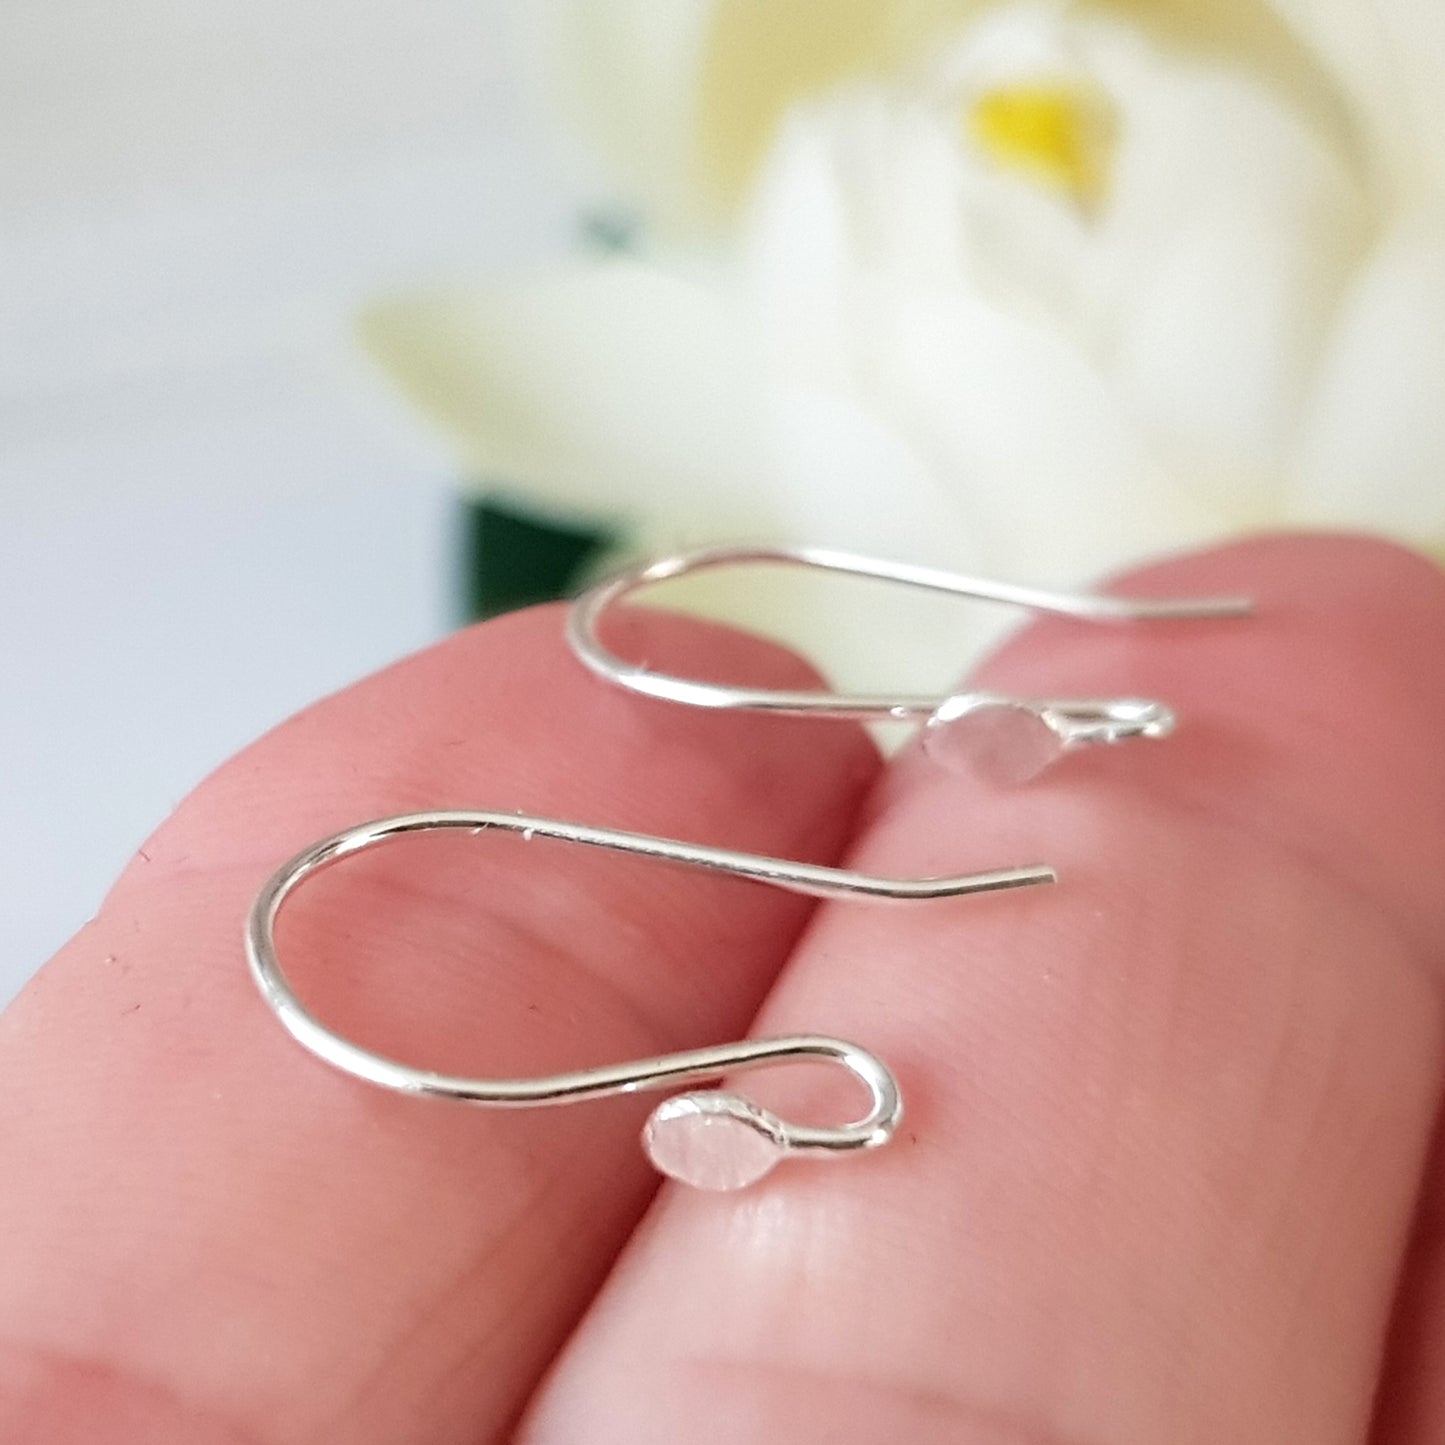 Ear Hooks & Headpin Set [10 Pairs] Flat Ball Solid Sterling Silver | SS-029fEHset | Earring Making Supply